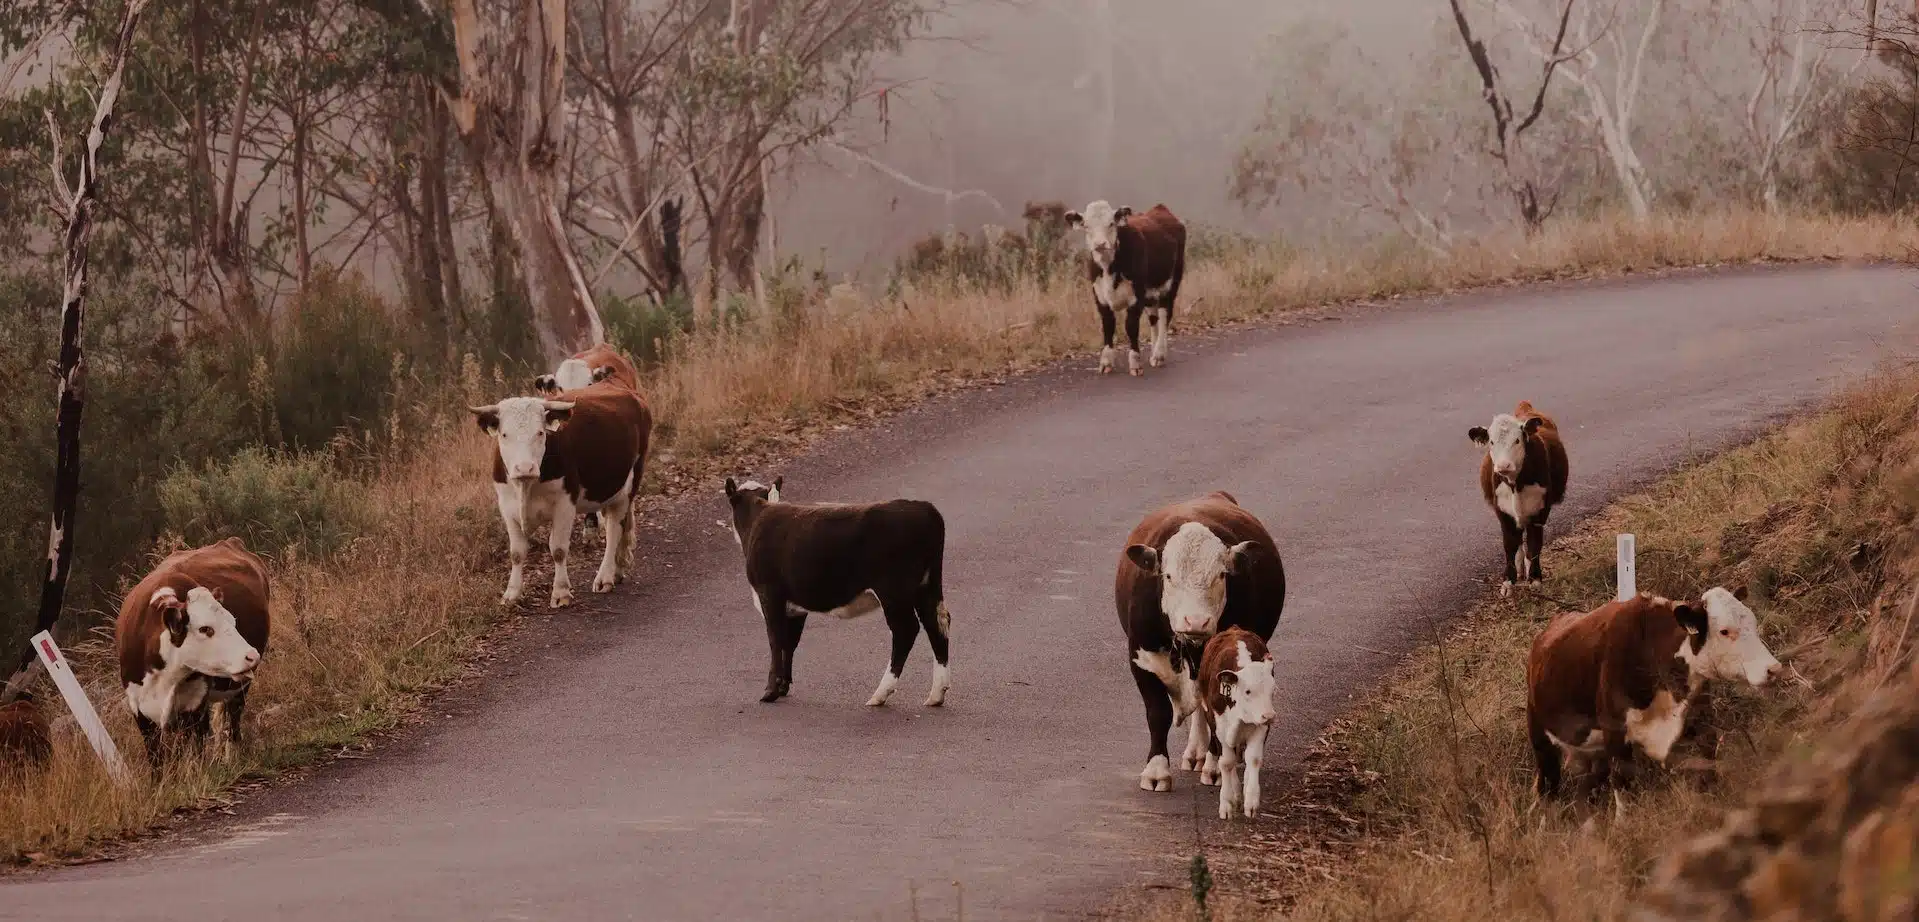 livestock like these cows can often be found wandering on regional roads